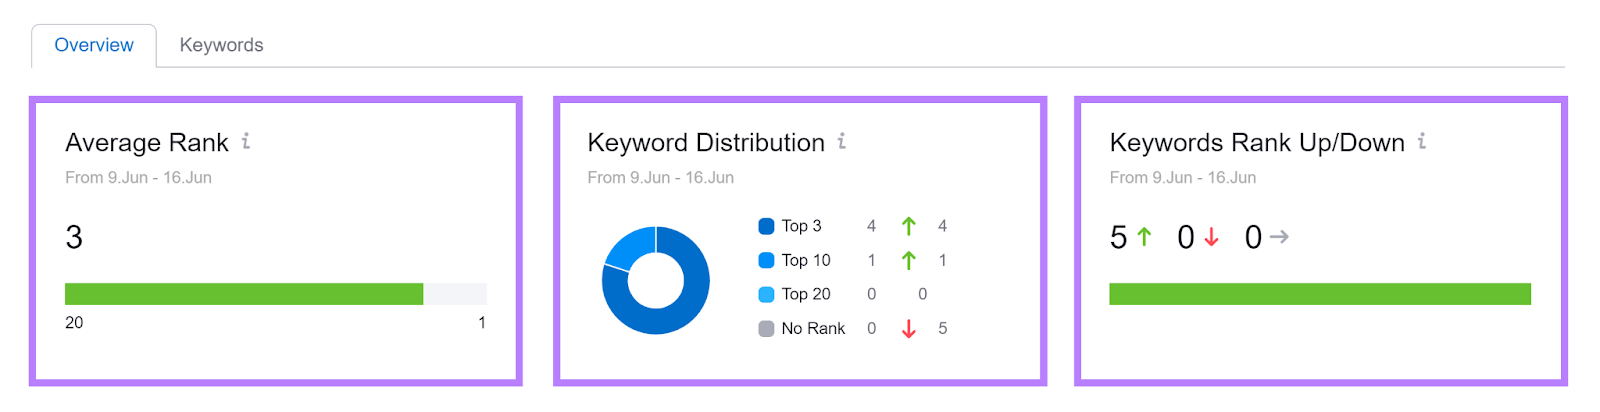 Rank Tracker channel overview page showing Average Rank, Keyword Distribution, and Rank Up/Down data.